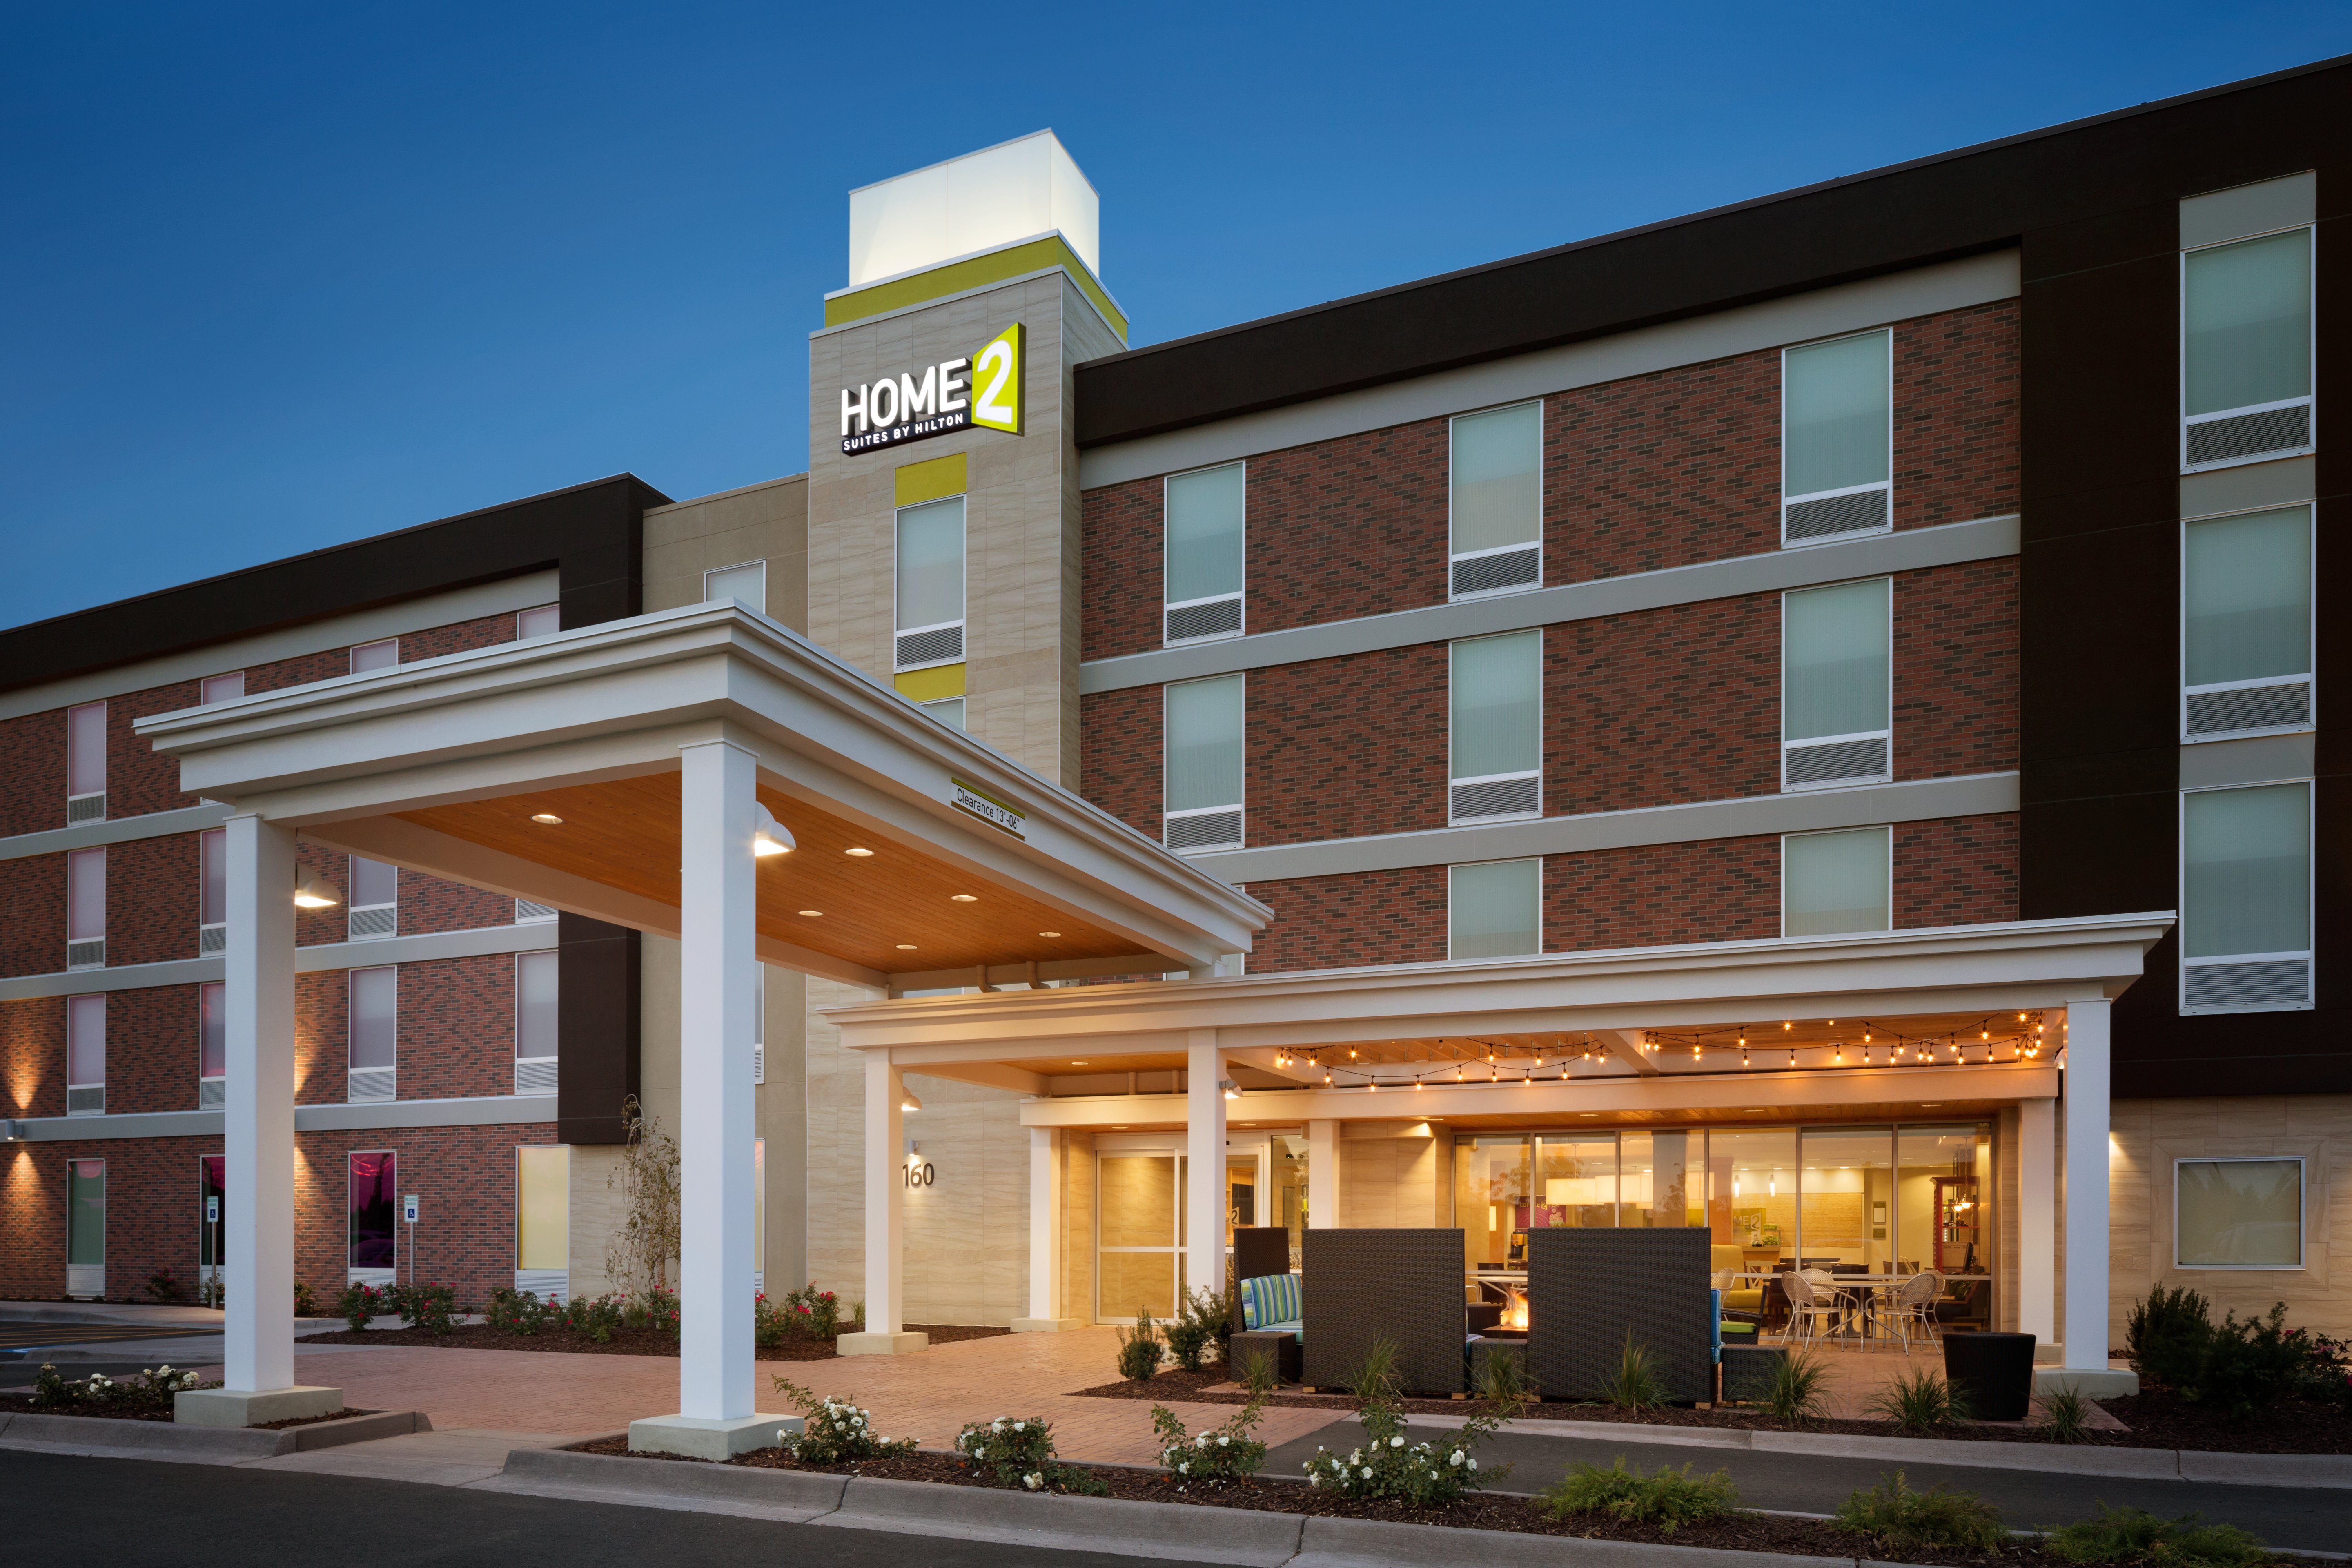 Angled View of Hotel Exterior, Signage, Entrance, and Landscaping Illuminated at Dusk